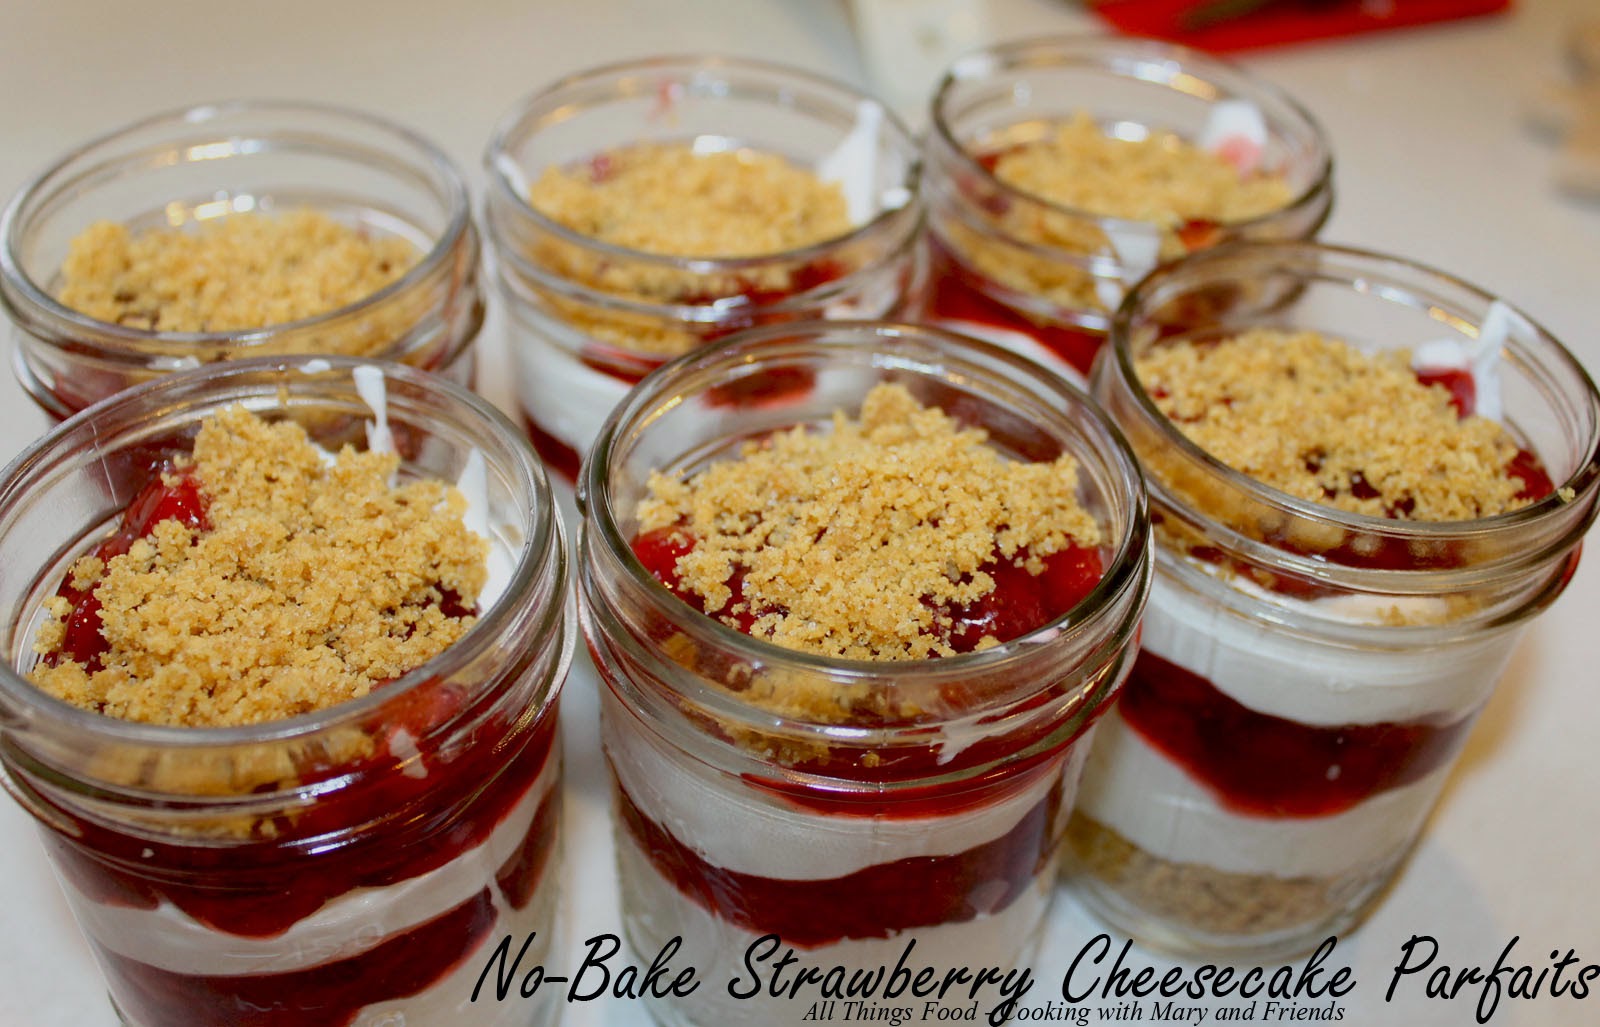 No Bake Strawberry Cheesecake Parfaits guest posts  My name is Roz but lots call me Rosie.  Welcome to Rosies Home Kitchen.  I moved from the UK to France in 2005, gave up my business and with my husband, Paul, and two sons converted a small cottage in rural Brittany to our home   Half Acre Farm.  It was here after years of ready meals and take aways in the UK I realised that I could cook. Paul also learned he could grow vegetables and plant fruit trees; we also keep our own poultry for meat and eggs. Shortly after finishing the work on our house we was featured in a magazine called Breton and since then Ive been featured in a few magazines for my food.  My two sons now have their own families but live near by and Im now the proud grandmother of two little boys. Both of my daughter in laws are both great cooks.  My cooking is home cooking, but often with a French twist, my videos are not there to impress but inspire, So many people say that they cant cook, but we all can, you just got to give it a go.